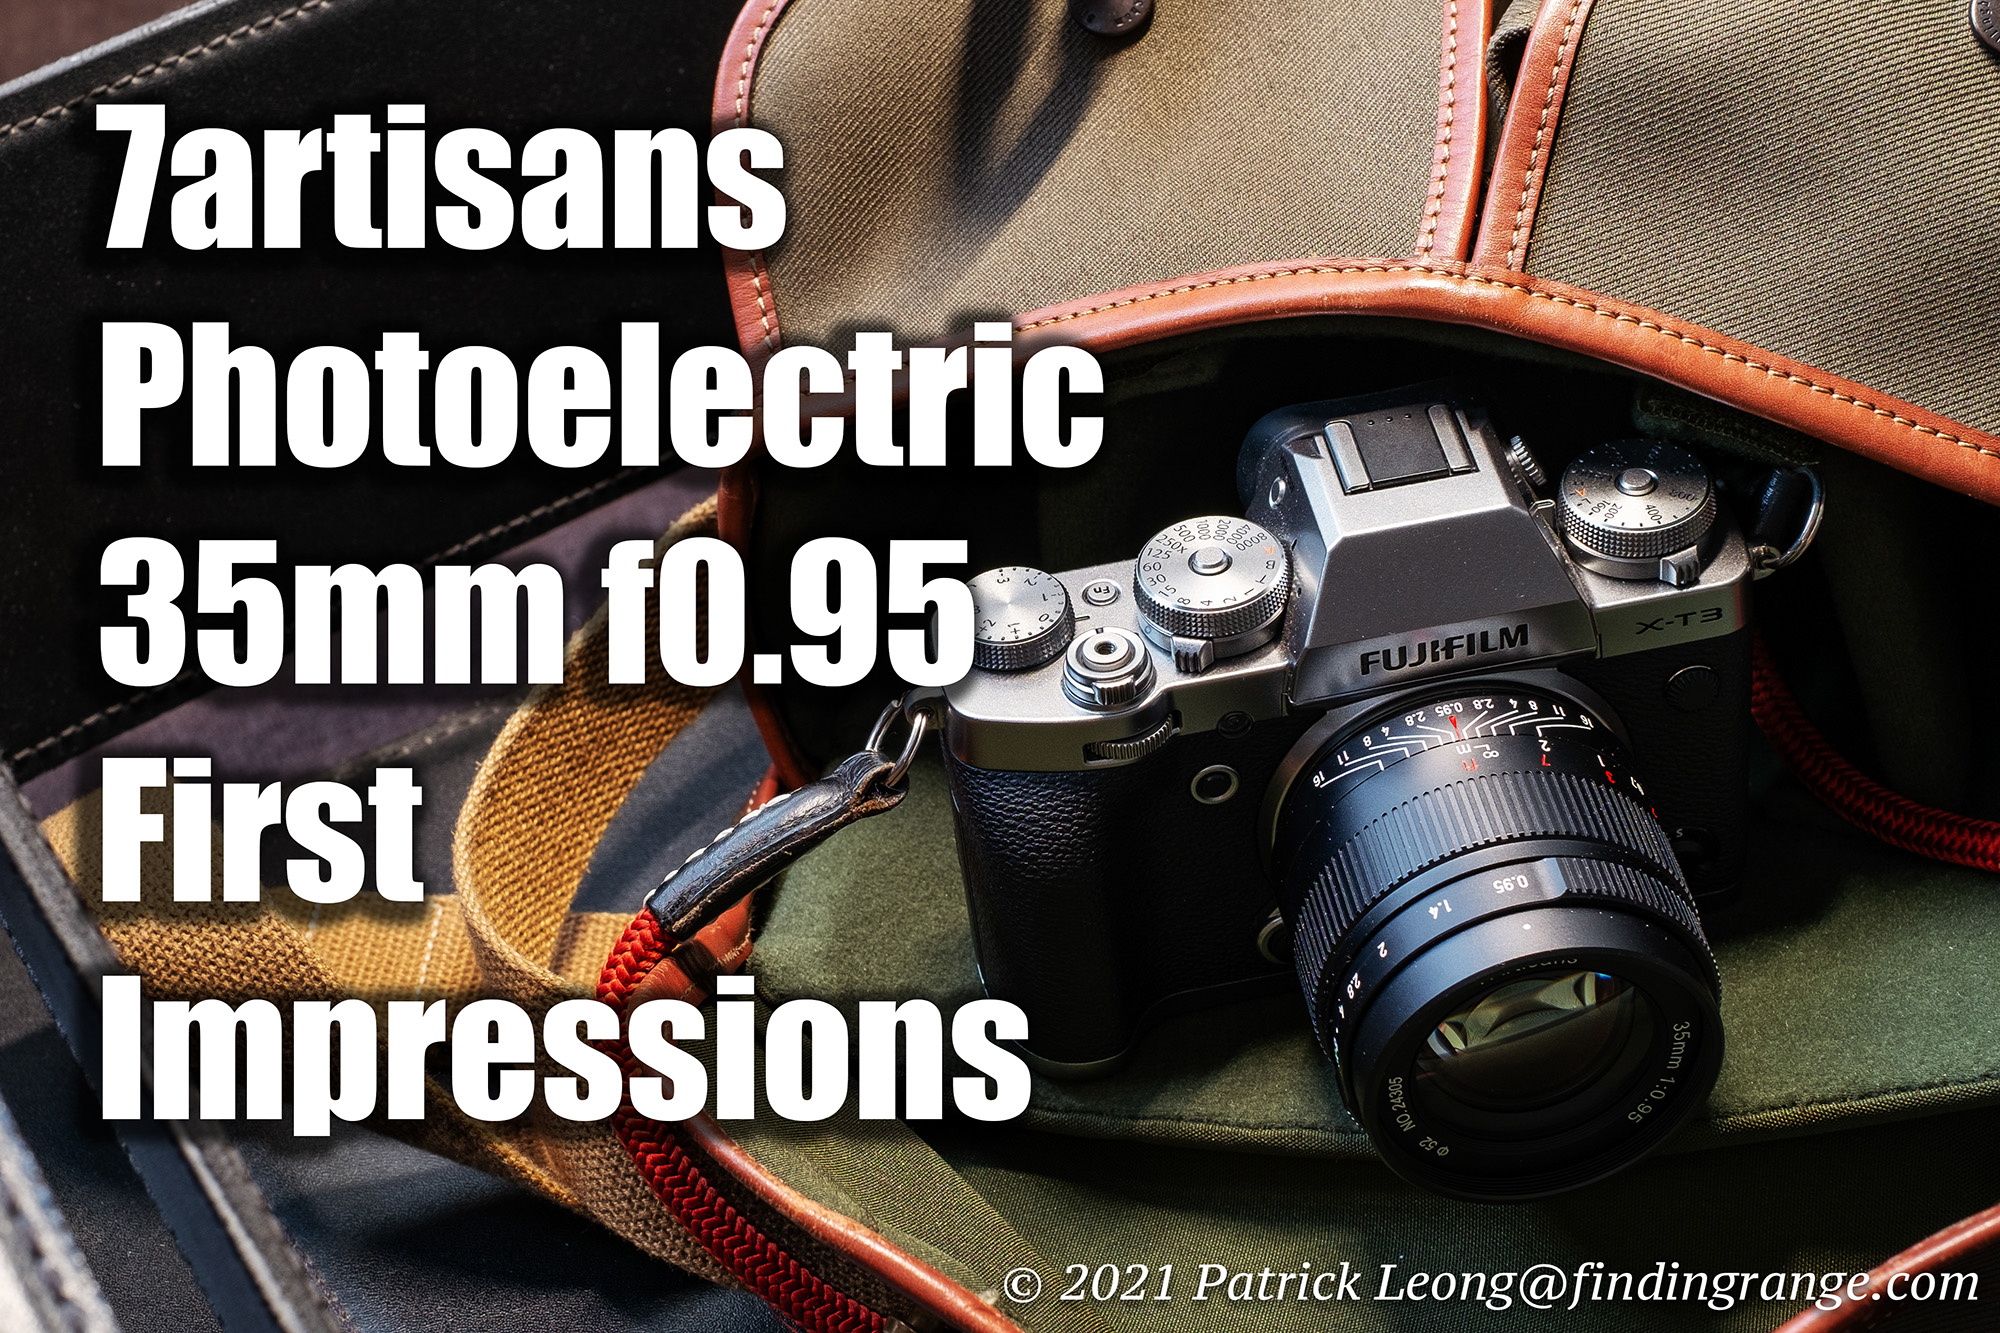 7artisans Photoelectric 35mm f0.95 First Impressions - Finding Range